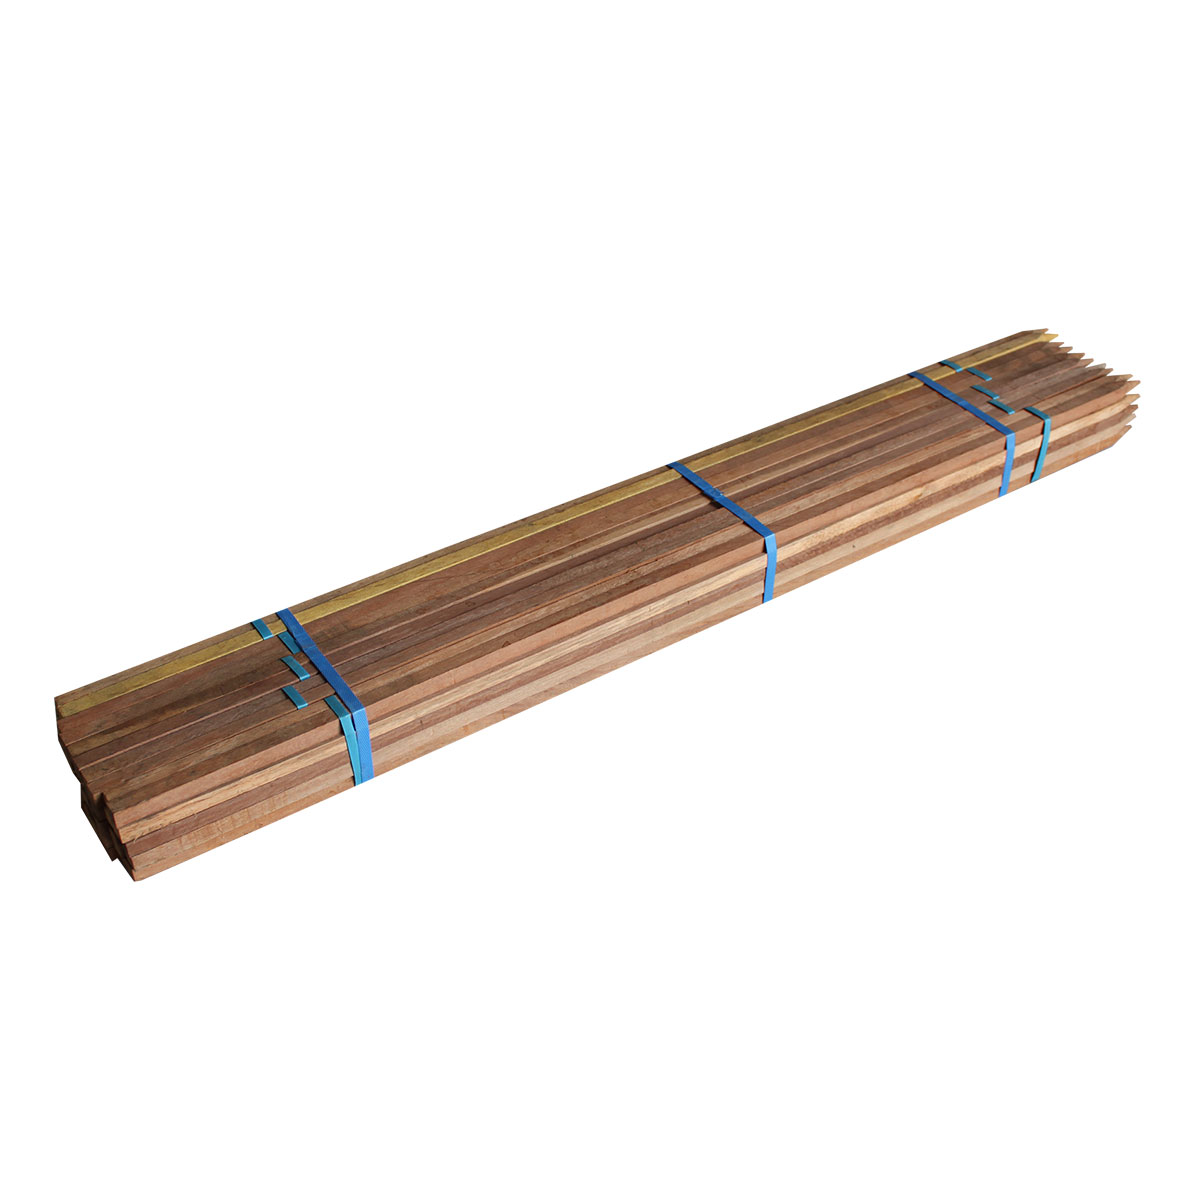 Hardwood Stakes 12 x 12 x 1200mm - 100 Pack